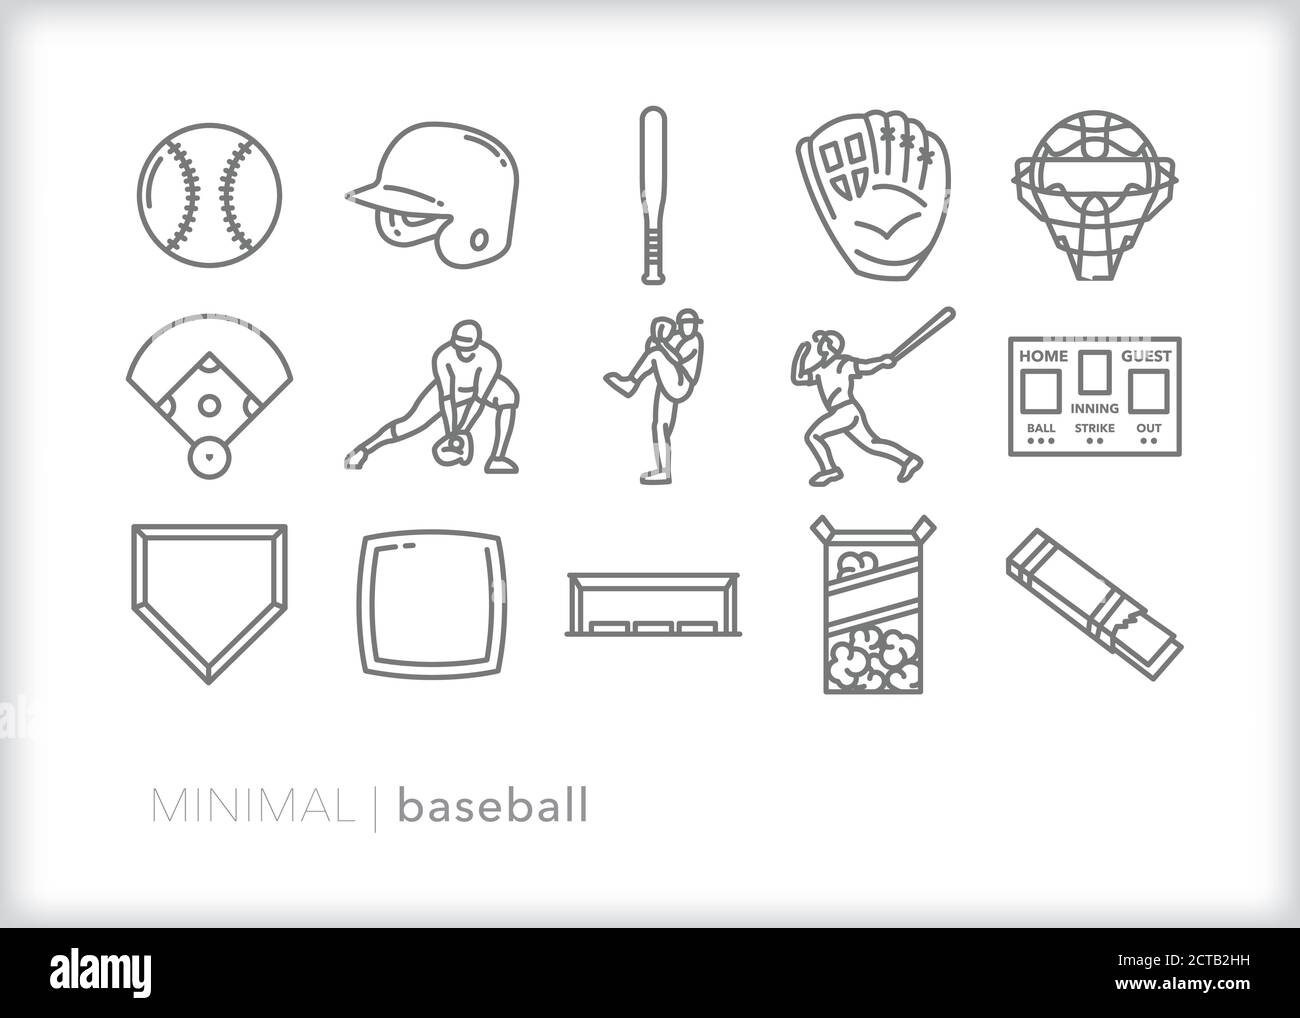 Set of baseball game line icons including sports equipment, player positions and fan refreshments Stock Vector